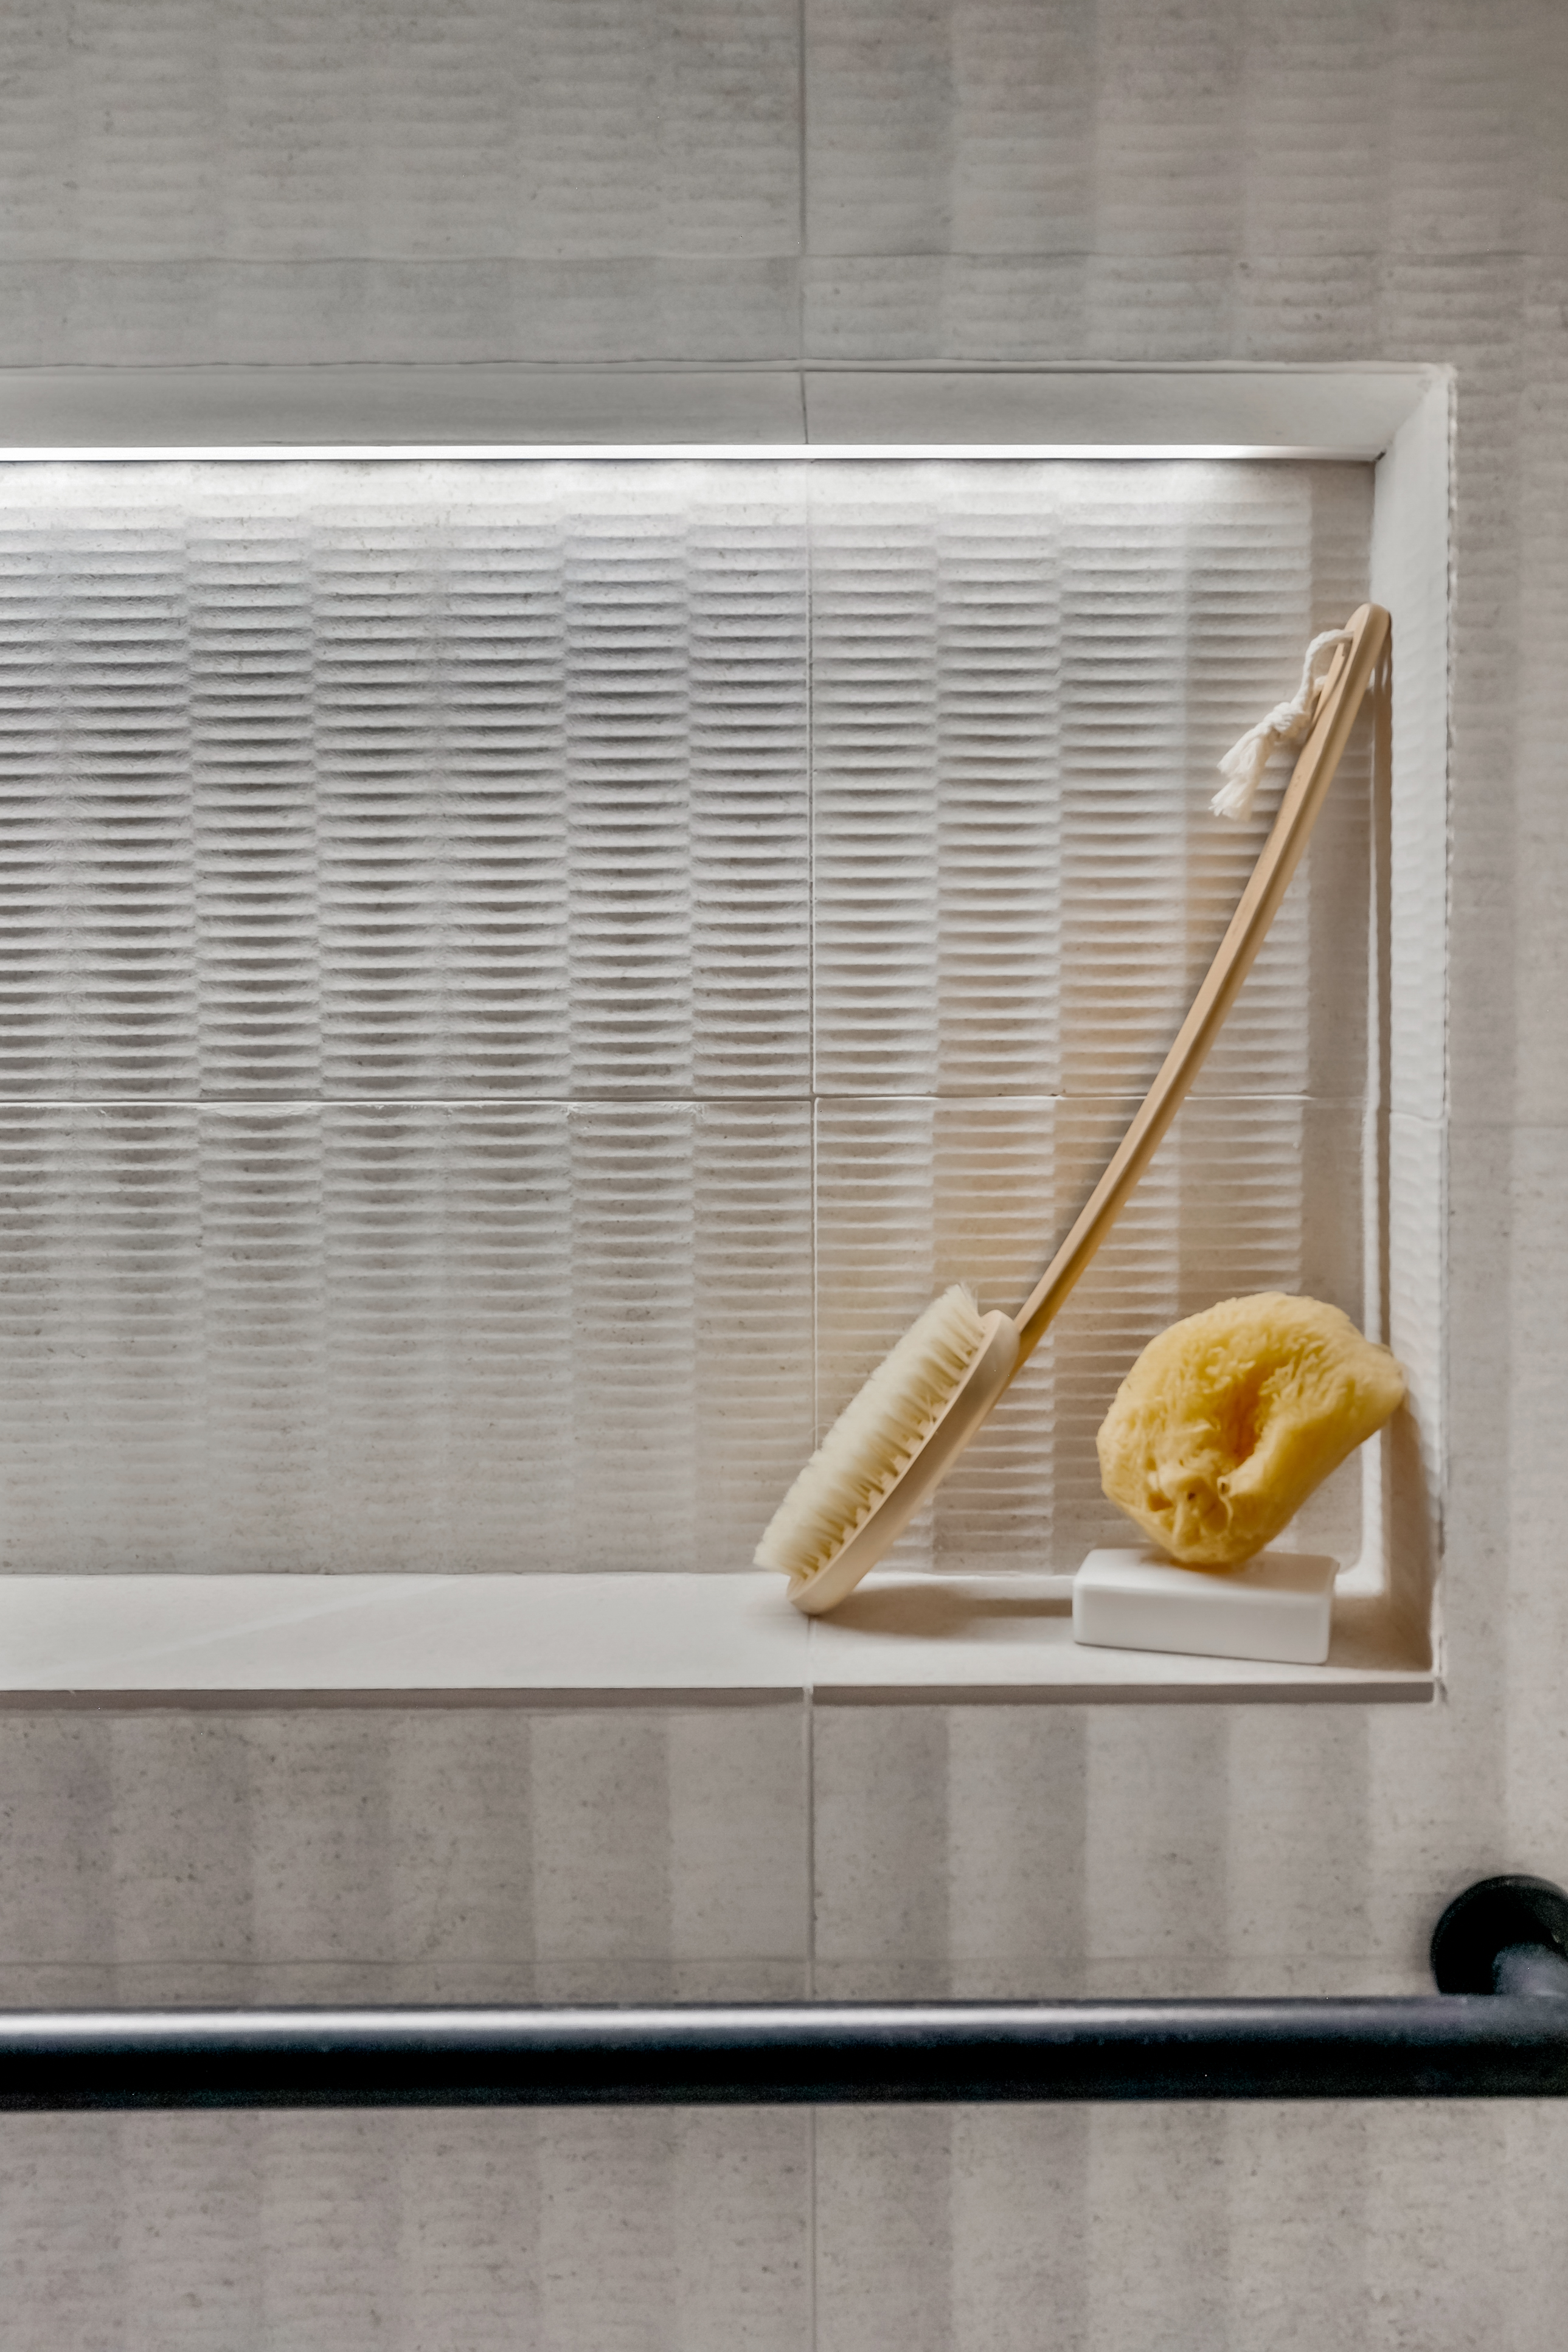 Bathroom Product Niche With Cove Lighting And Grab Bars